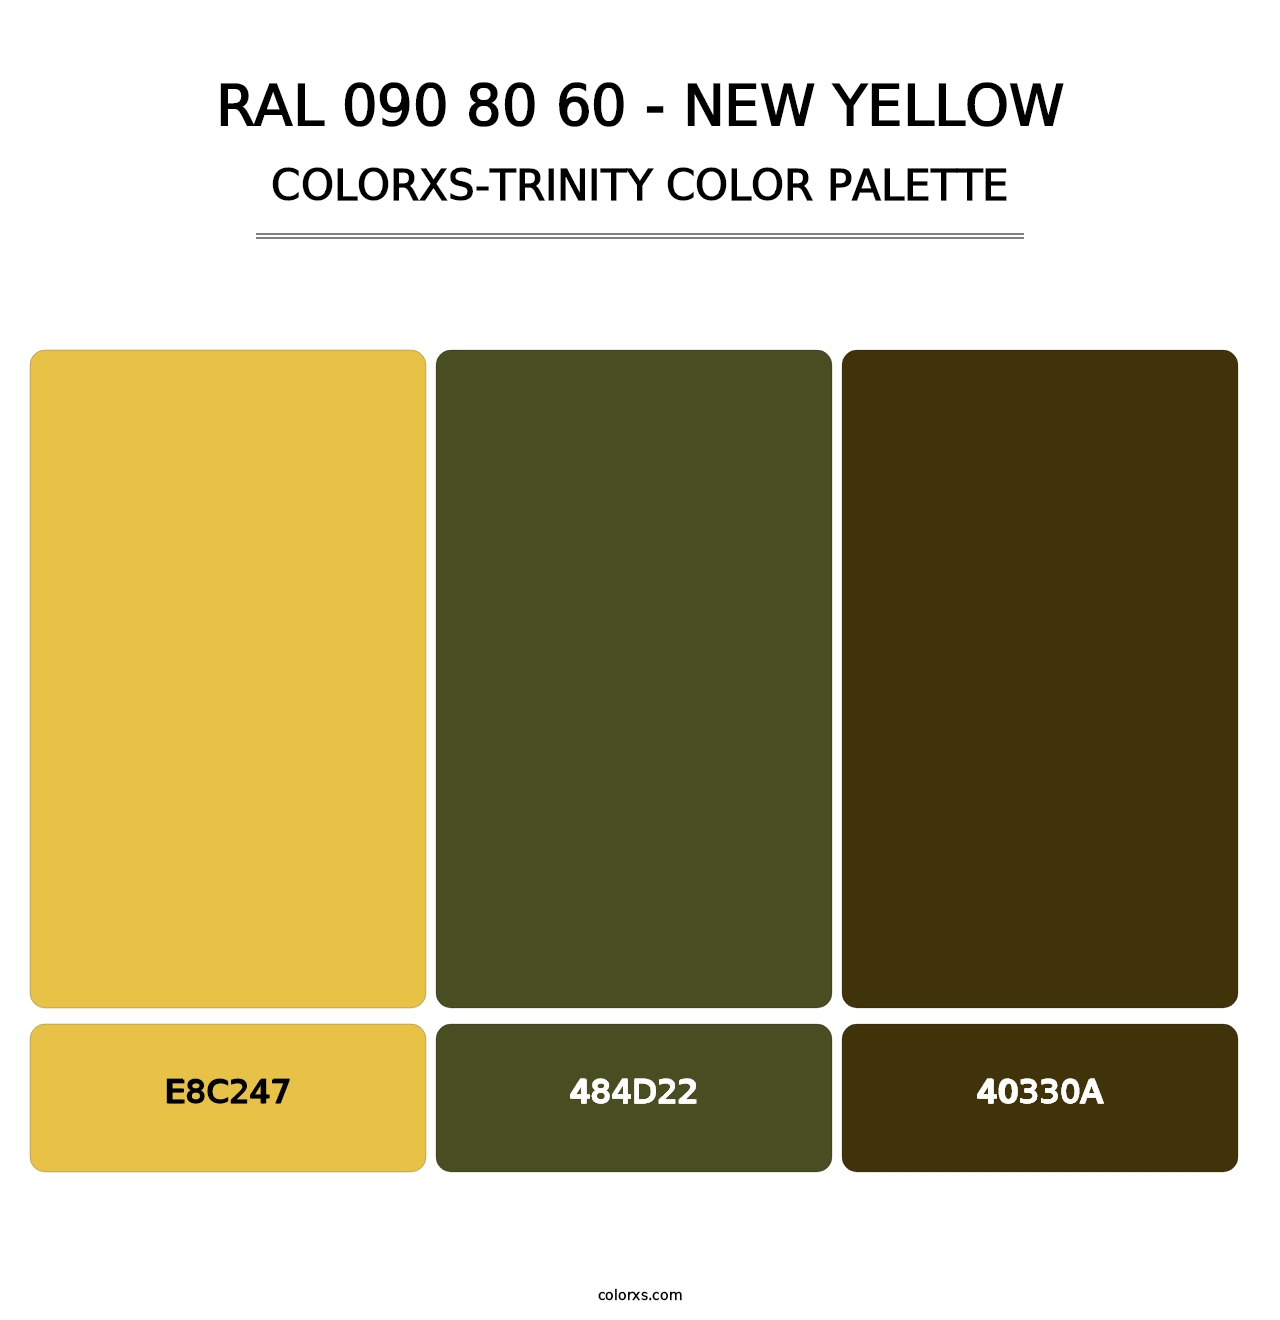 RAL 090 80 60 - New Yellow - Colorxs Trinity Palette